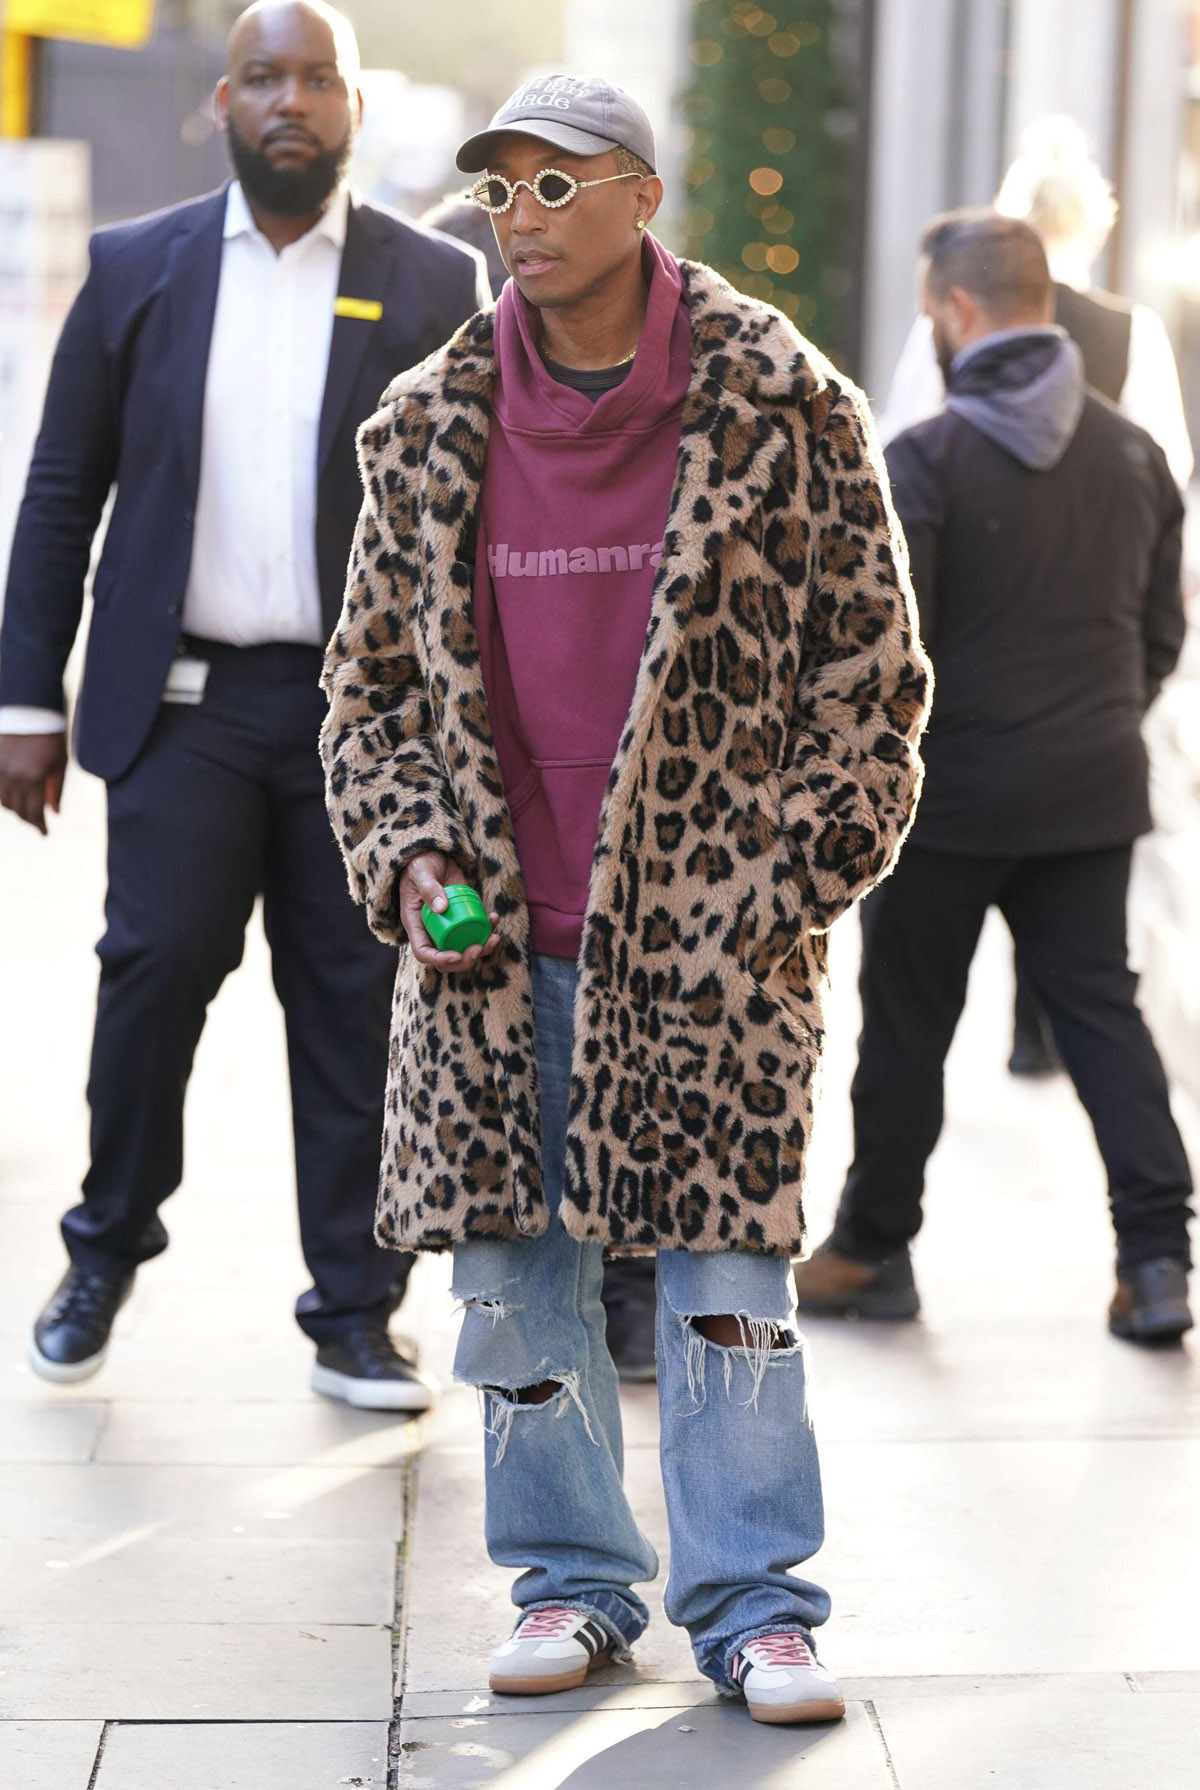 Style Icon Of The Week: Pharrell Williams, The Neptunes #1 fan